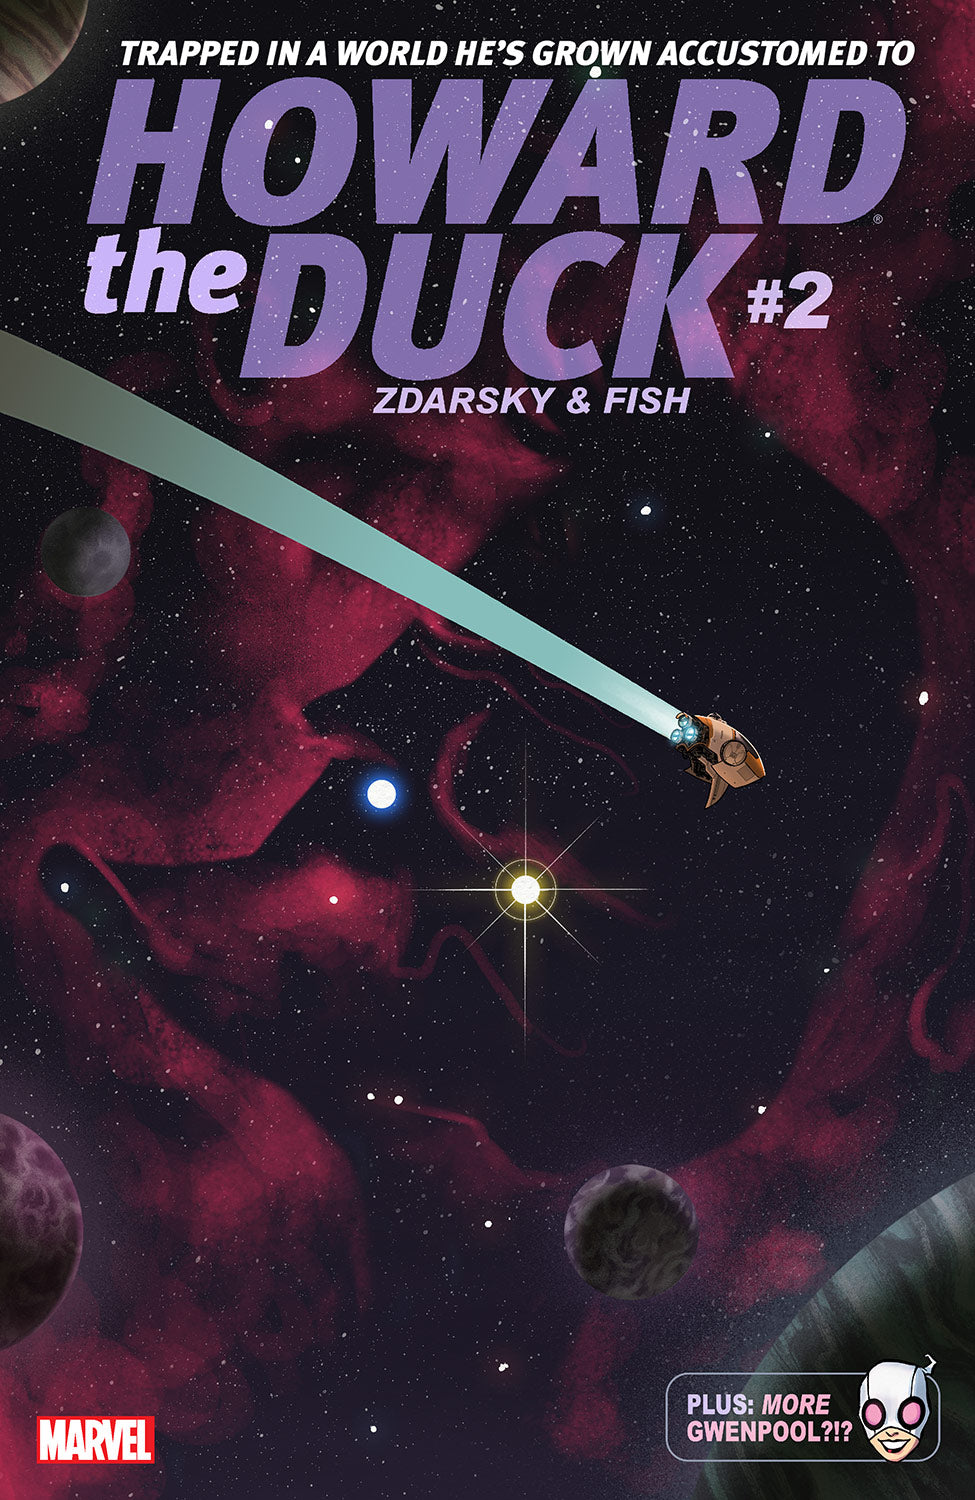 Howard the Duck Vol.6 #2 (2015-2016) - Boxcat Games & Collectibles